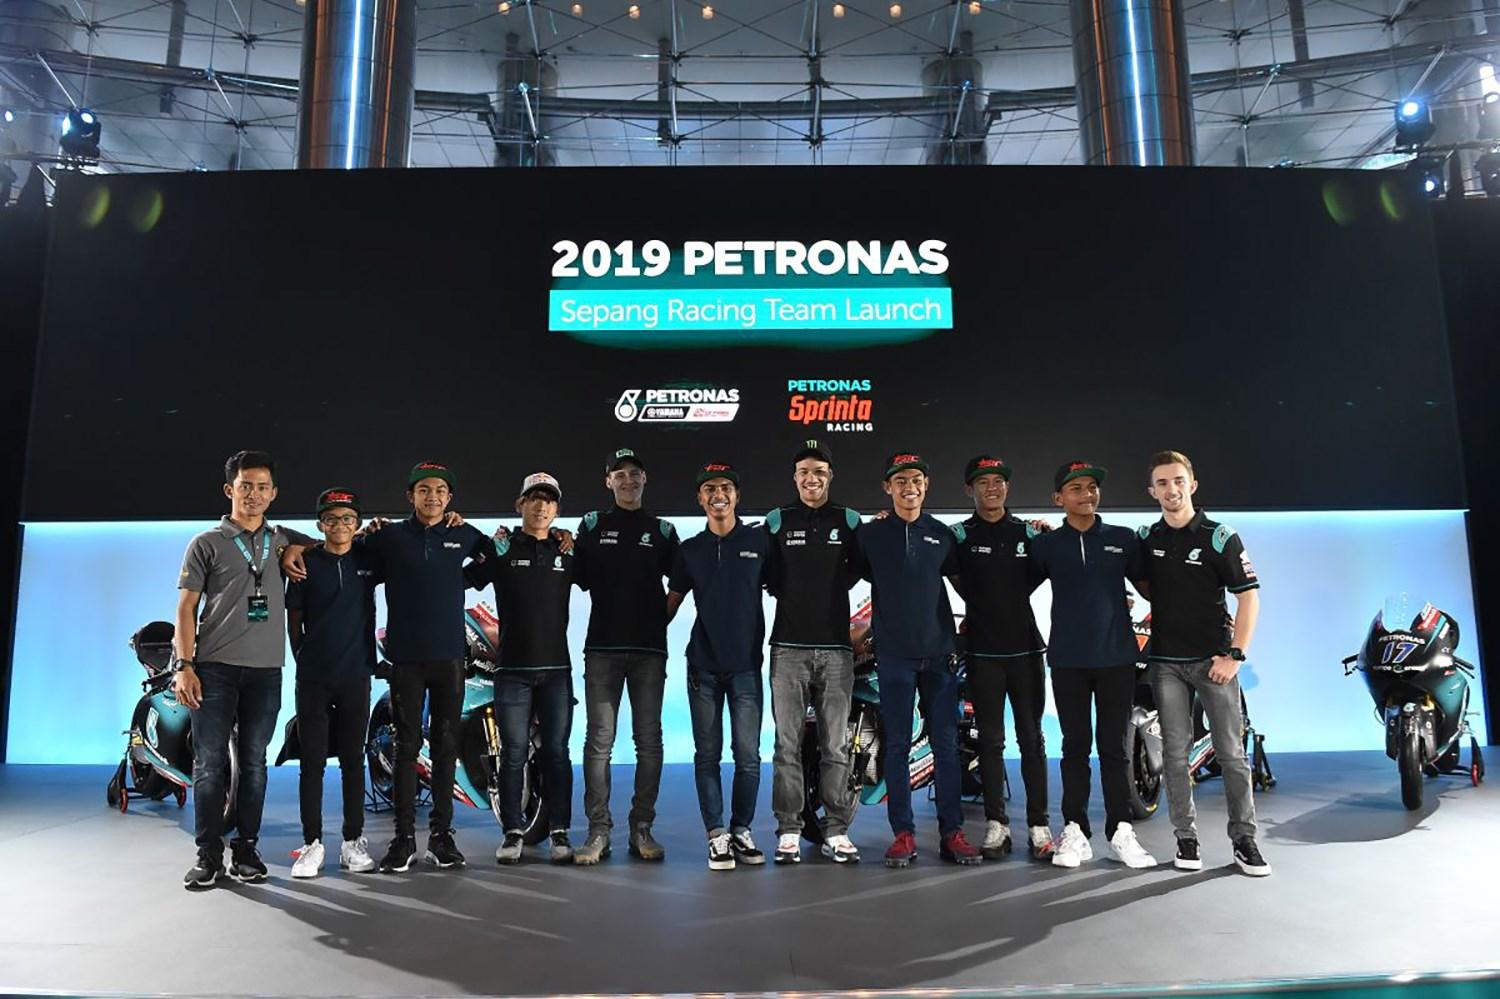 Video: Behind the scenes at the Petronas Yamaha launch